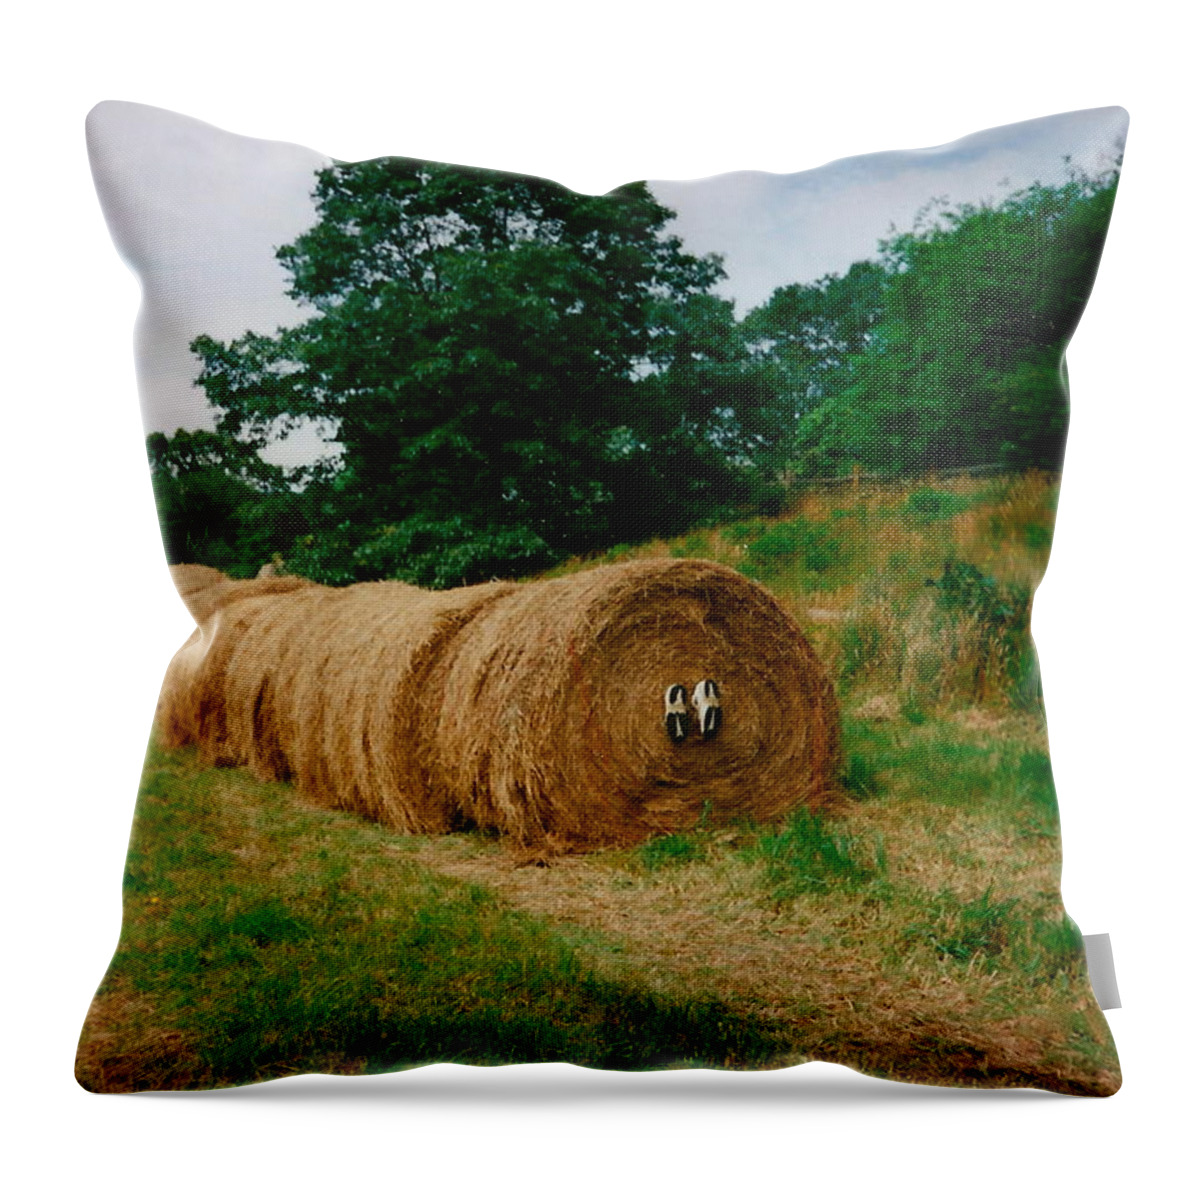 Hay Throw Pillow featuring the photograph Hey- Hay Roll by Jeffrey Canha